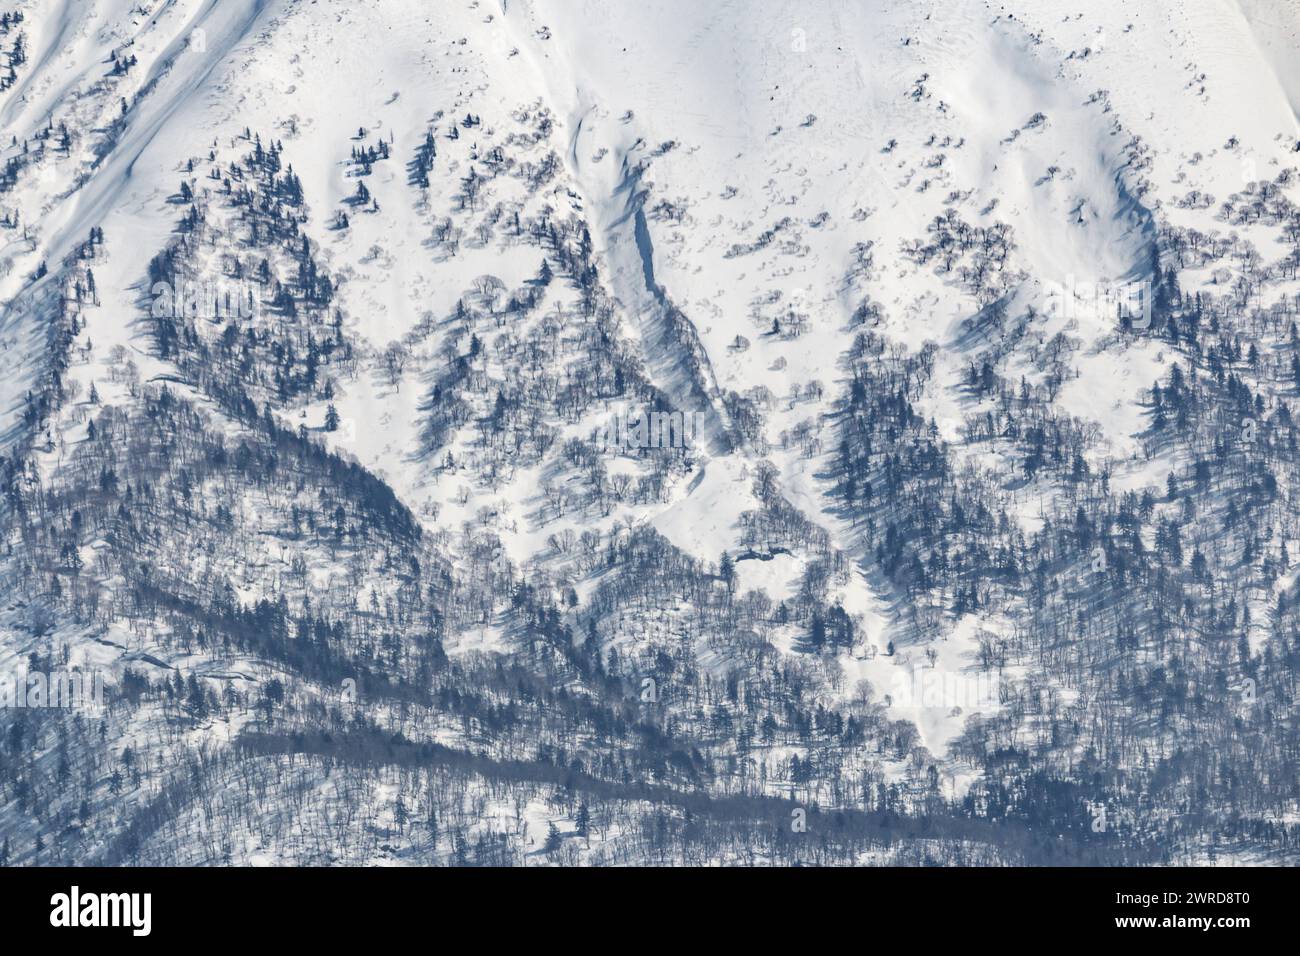 Close-up of forests at base of snowy volcano Yotei mountain in winter Stock Photo